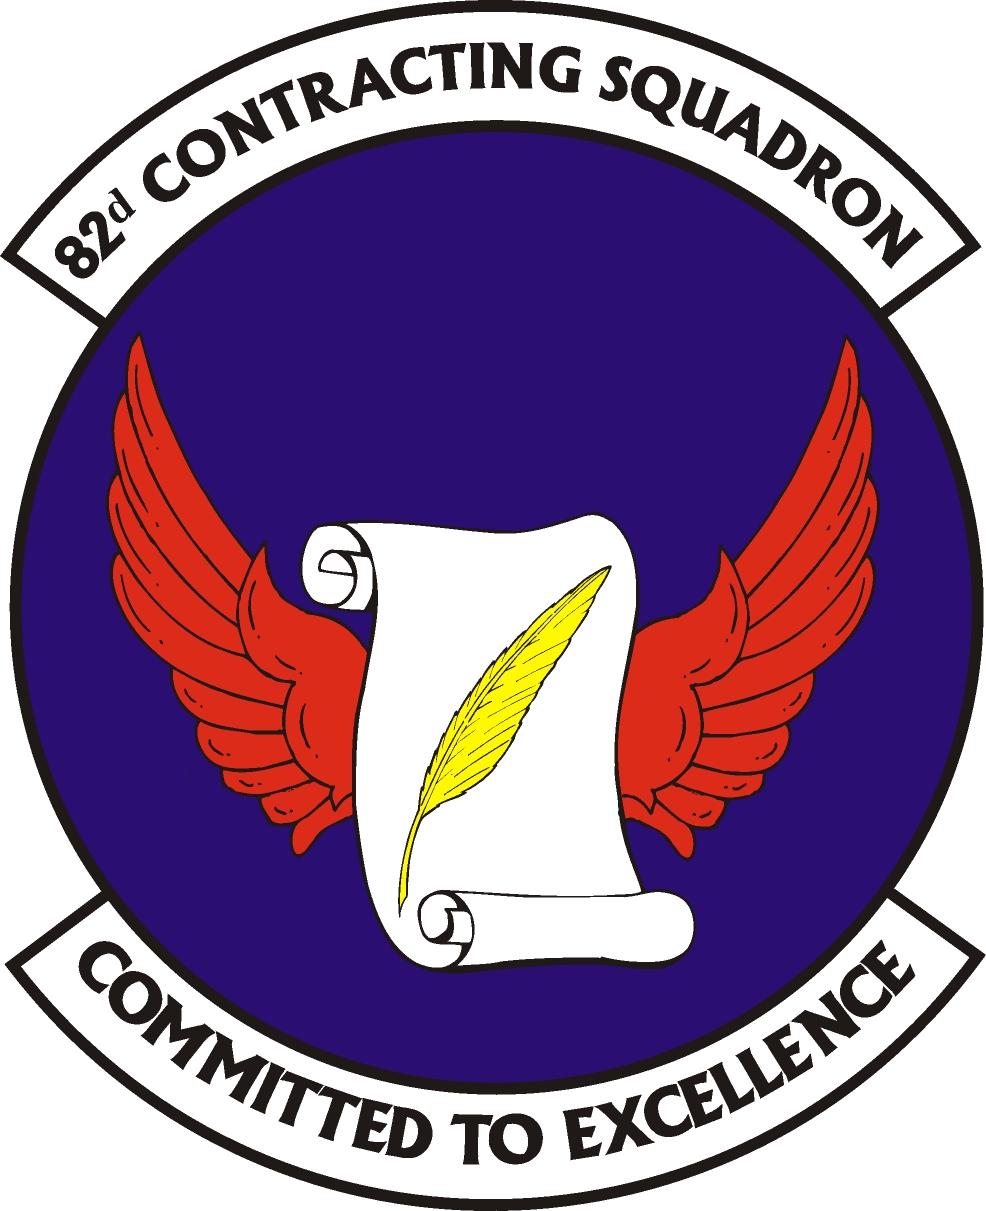 82nd Contracting Squdaron